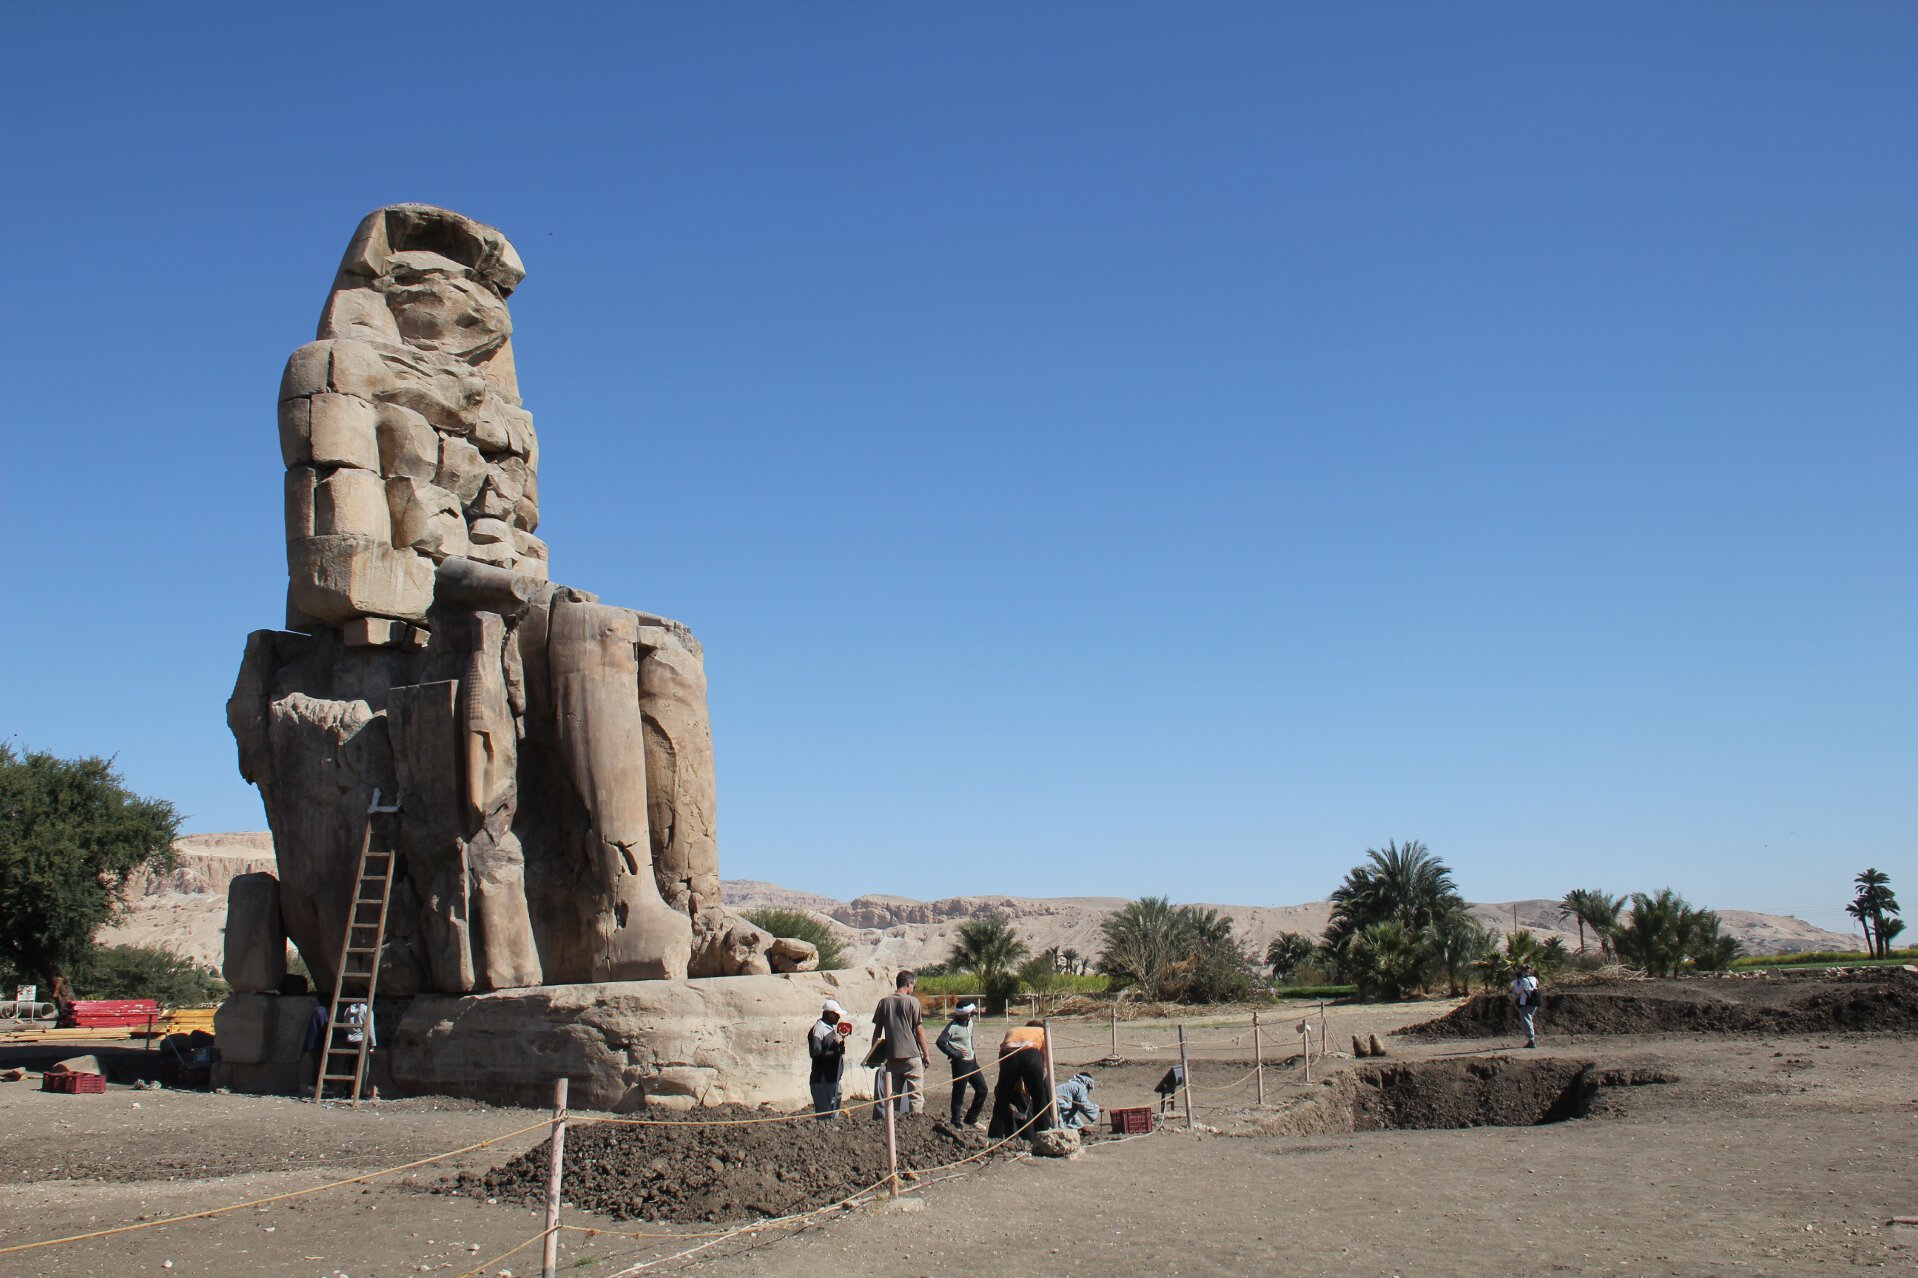 Restorationists work on one of the Colossi of Memnon at the entrance to the Theban Necropolis.